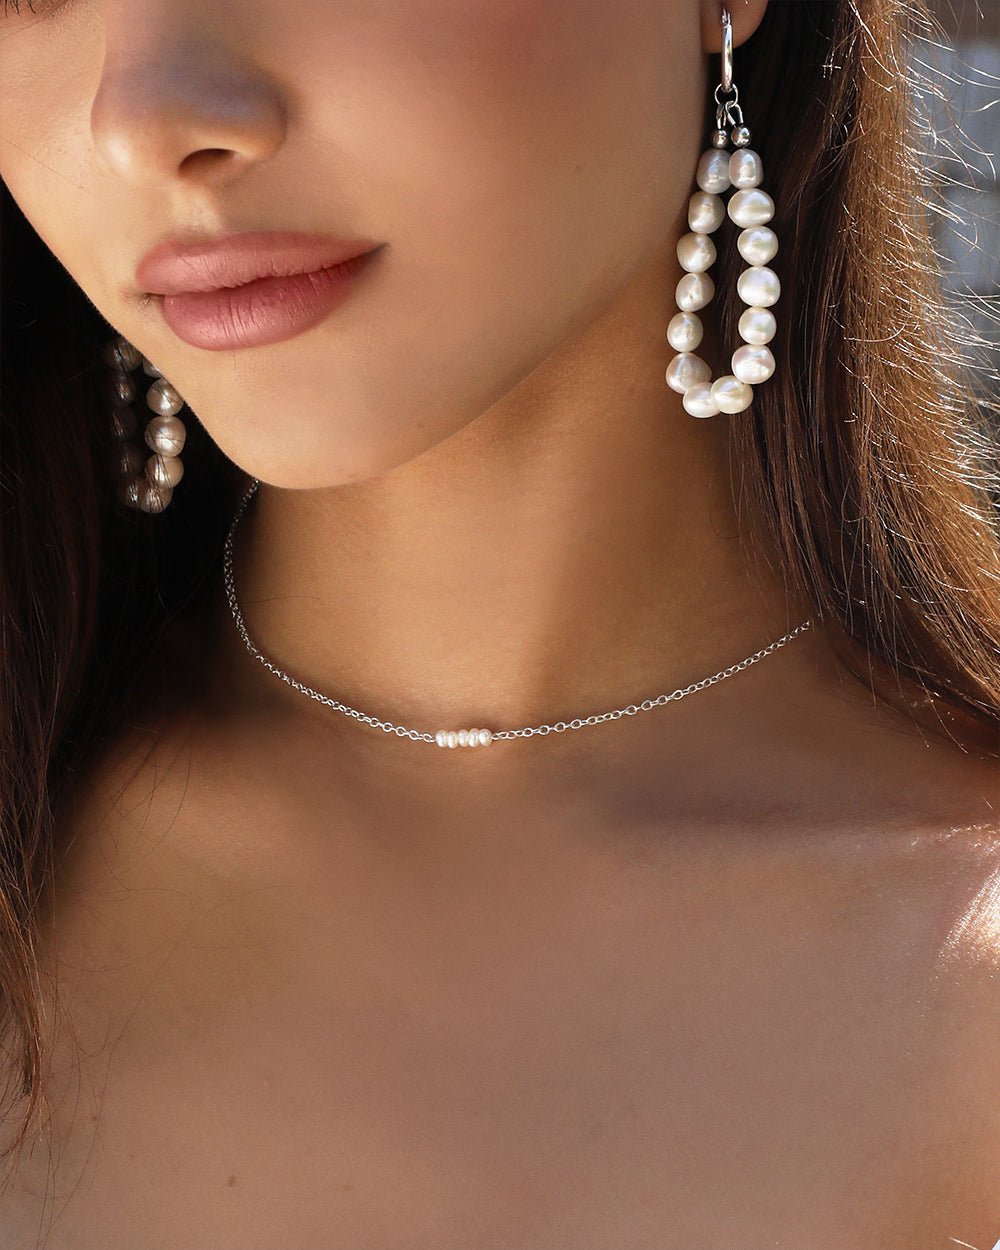 Load image into Gallery viewer, SMALL FRESHWATER PEARL STACK NECKLACE- Sterling Silver - The Littl - Deluxe Chain - 37cm (choker)
